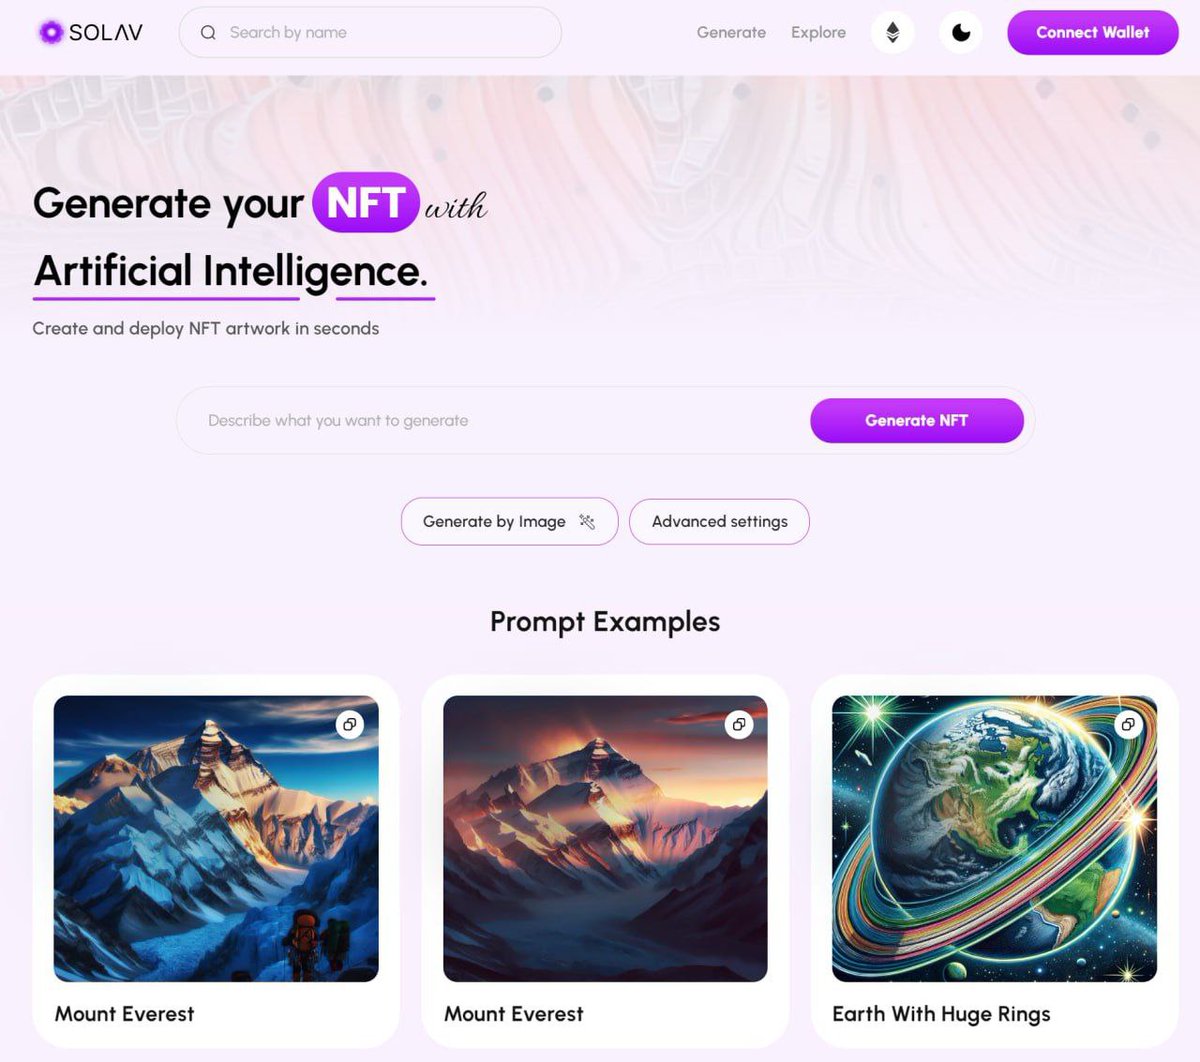 🚀 Exciting News: $SOLAV is on the verge of launching its cutting-edge Generative AI-based NFT Marketplace! 

Explore the Phase 1 milestone featuring an AI-powered NFT generator at app.solav.io. Our innovative model integrates SOLAV tokens for premium features, paving…